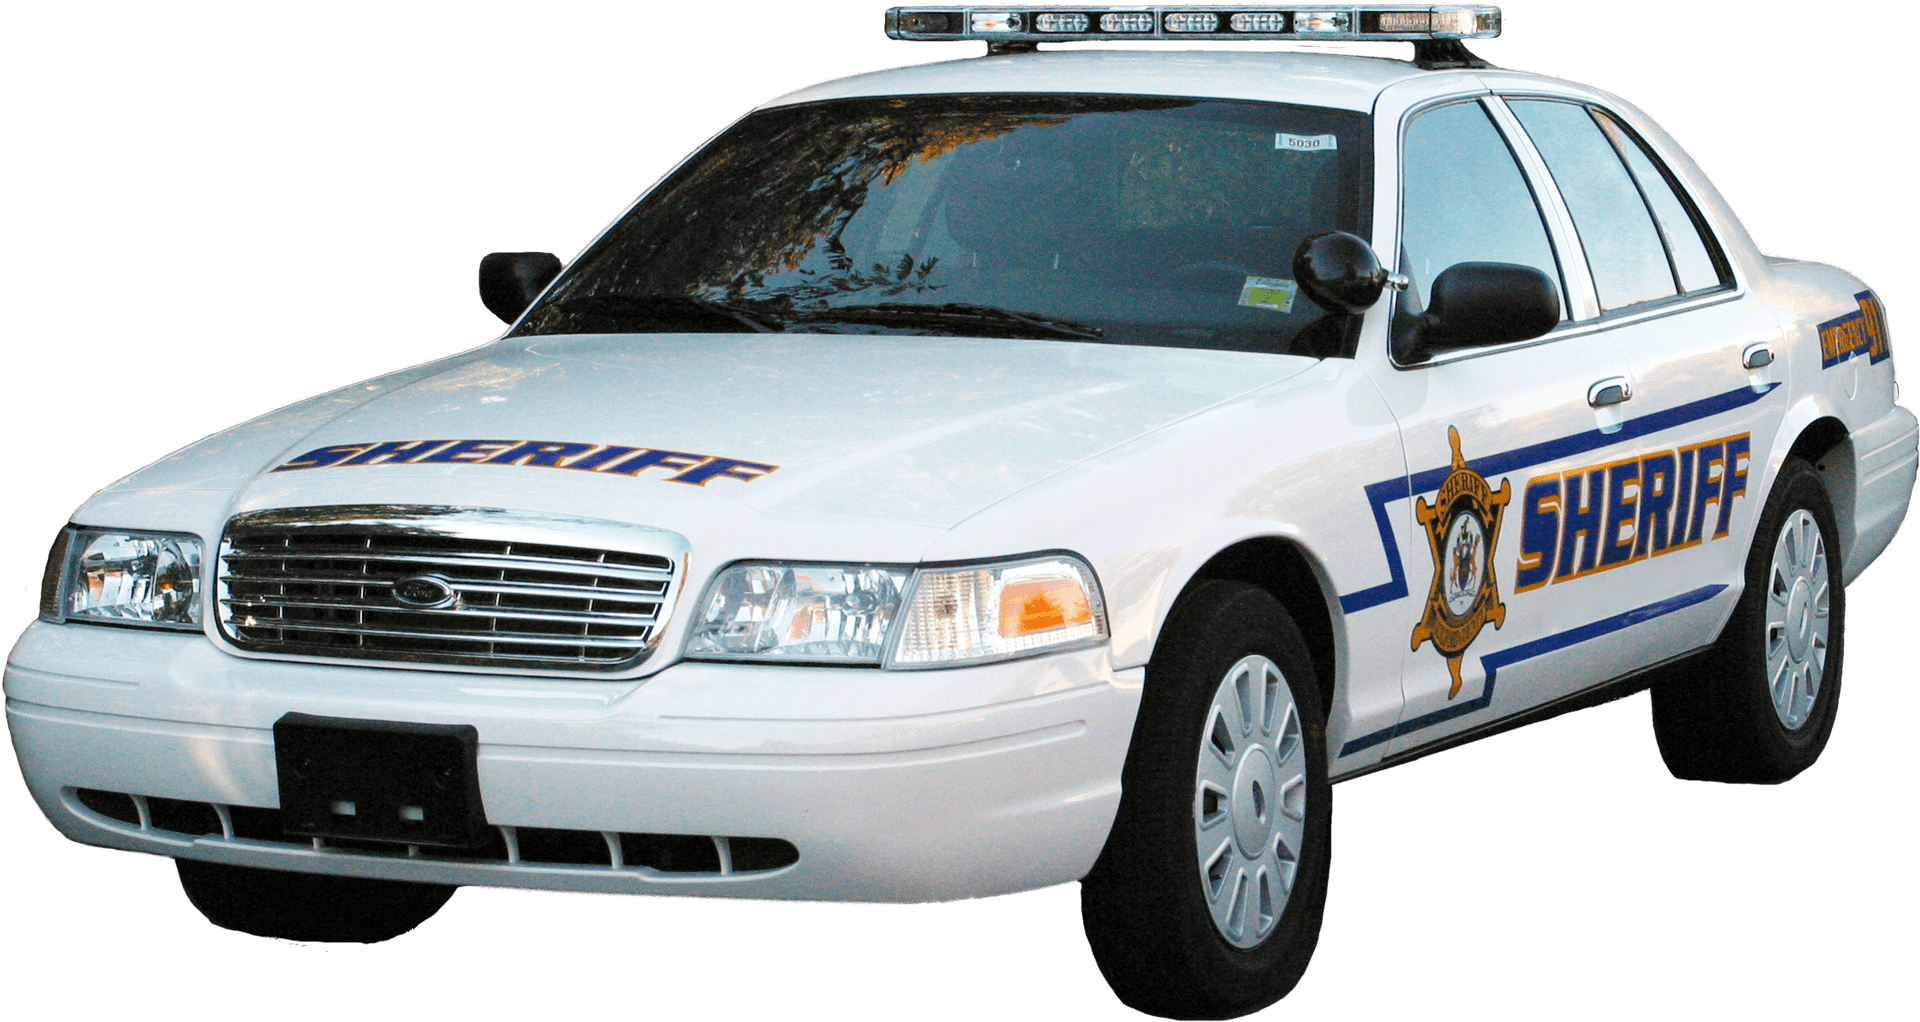 Sheriff Police Car Ford Crown Victoria PNG